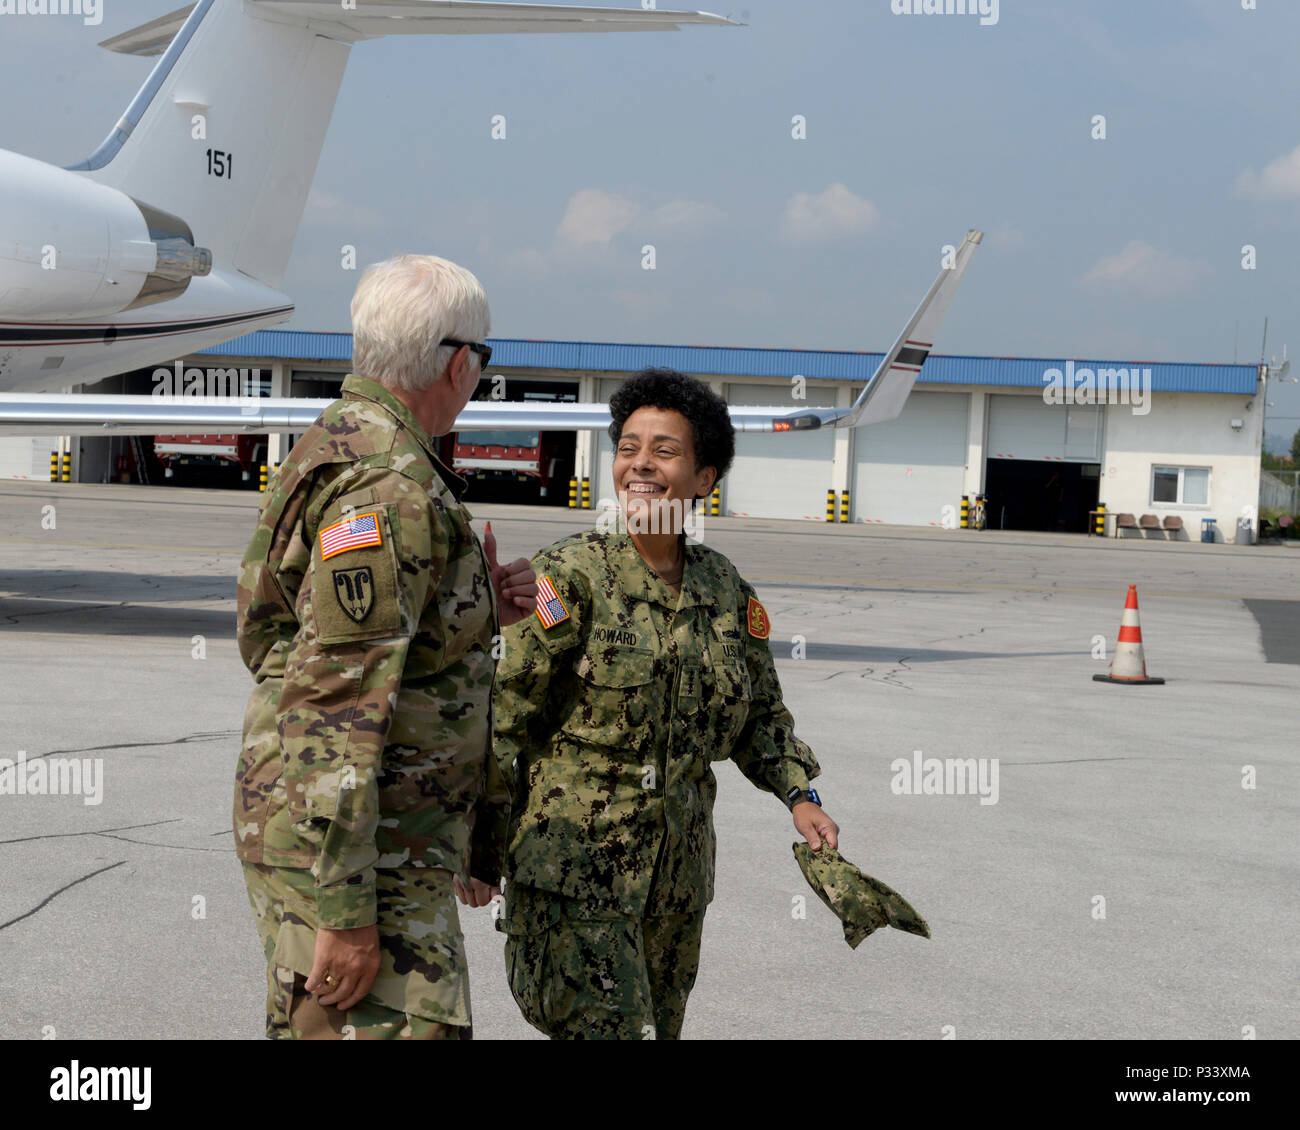 Brig. Gen. Giselle Wilz, NATO Headquarters Sarajevo commander, greets Adm. Michelle Howard, commander of Allied Joint Force Command, Naples, Italy, at the airport in Sarajevo, Bosnia and Herzegovina, Aug. 31, 2016. The admiral traveled to the capital city of BIH to discuss military and NATO operations in the Balkans area of responsibility. Stock Photo